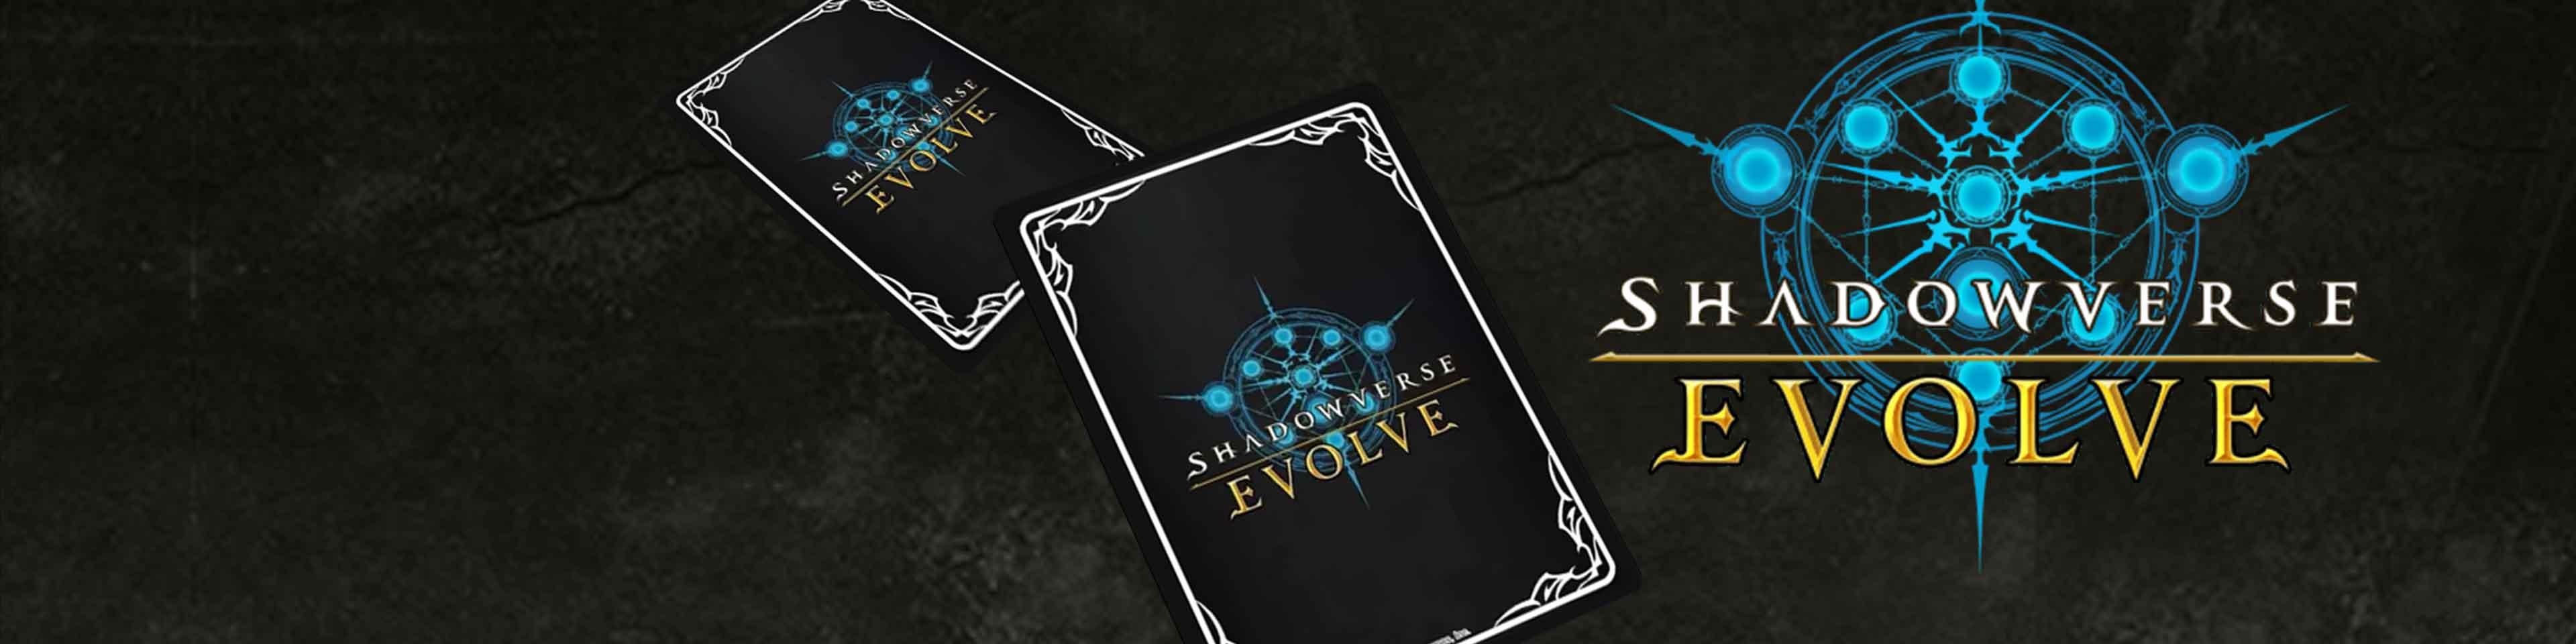 Shadowverse: Evolve | Trading Card Game - The Card Vault